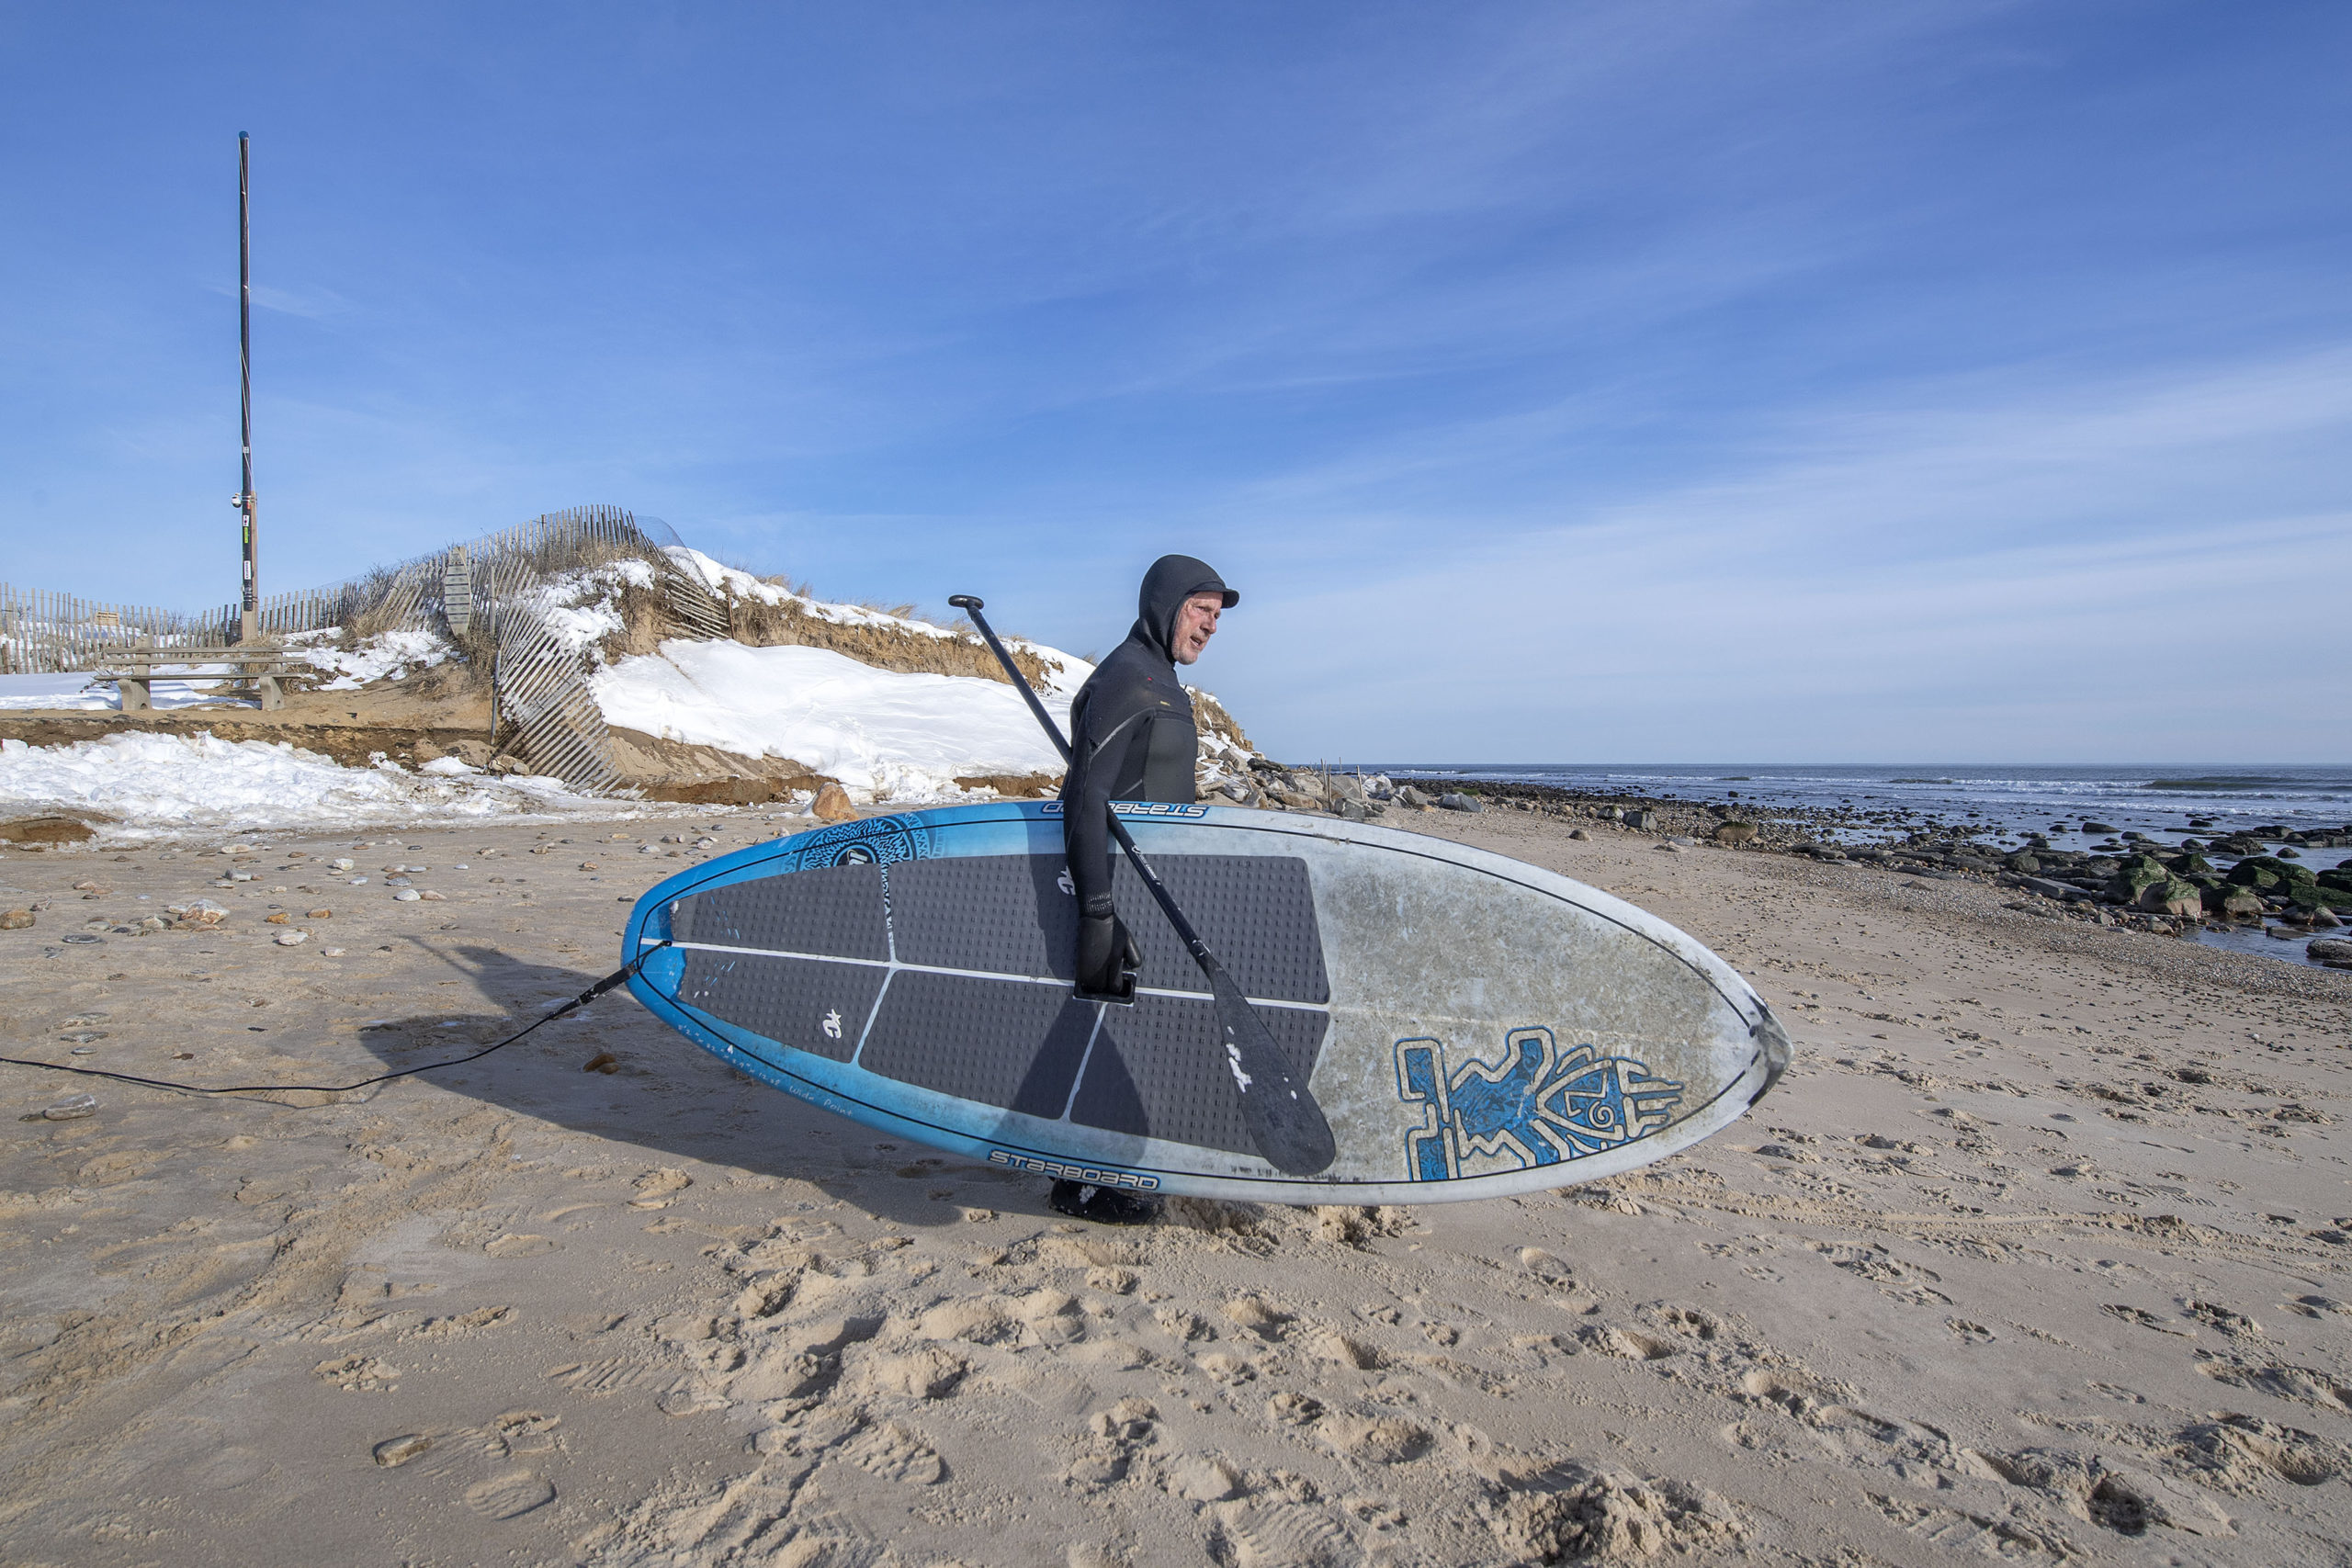 A wetsuit-clad paddleboarder takes to the water at Ditch Plains Beach in Montauk on a frigid January day on Monday.  MICHAEL HELLER